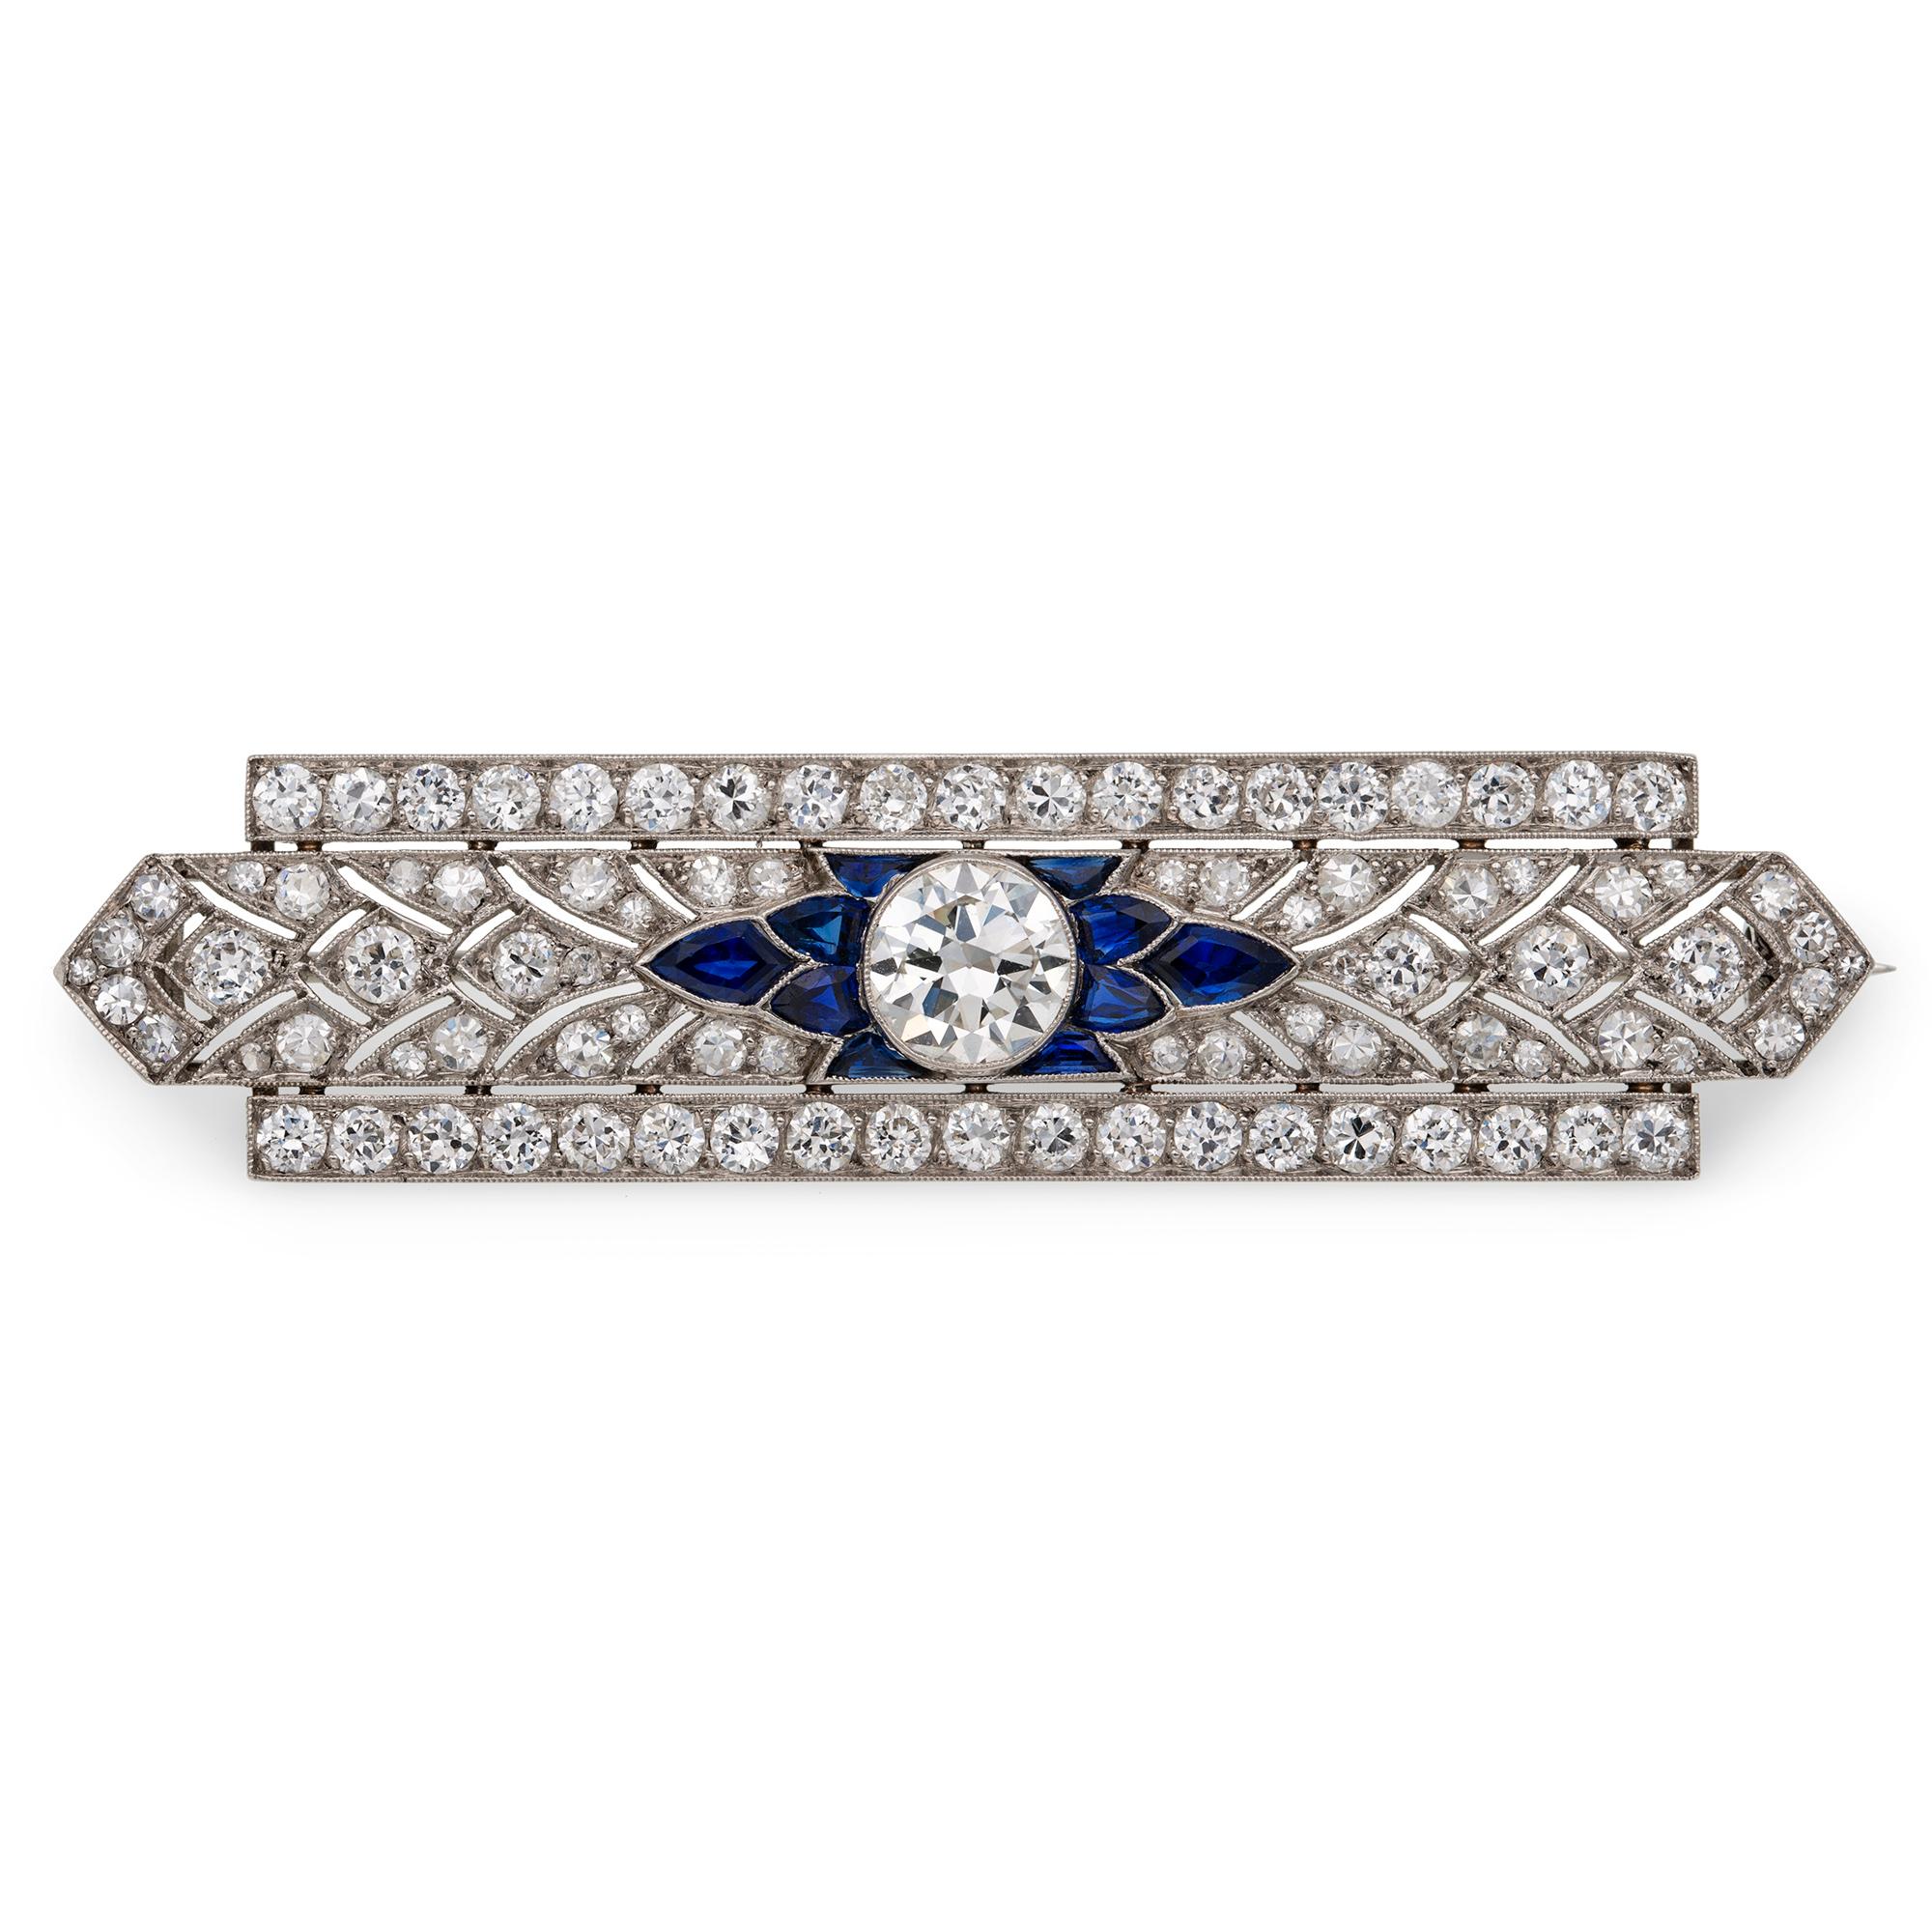 A fine Art Deco diamond and sapphire bar brooch, to the centre a transitional brilliant-cut diamond estimated to weigh 1.75 carats, assessed colour H-I, assessed clarity VS1-2, set between five fancy-cut sapphires on each side, to an openwork